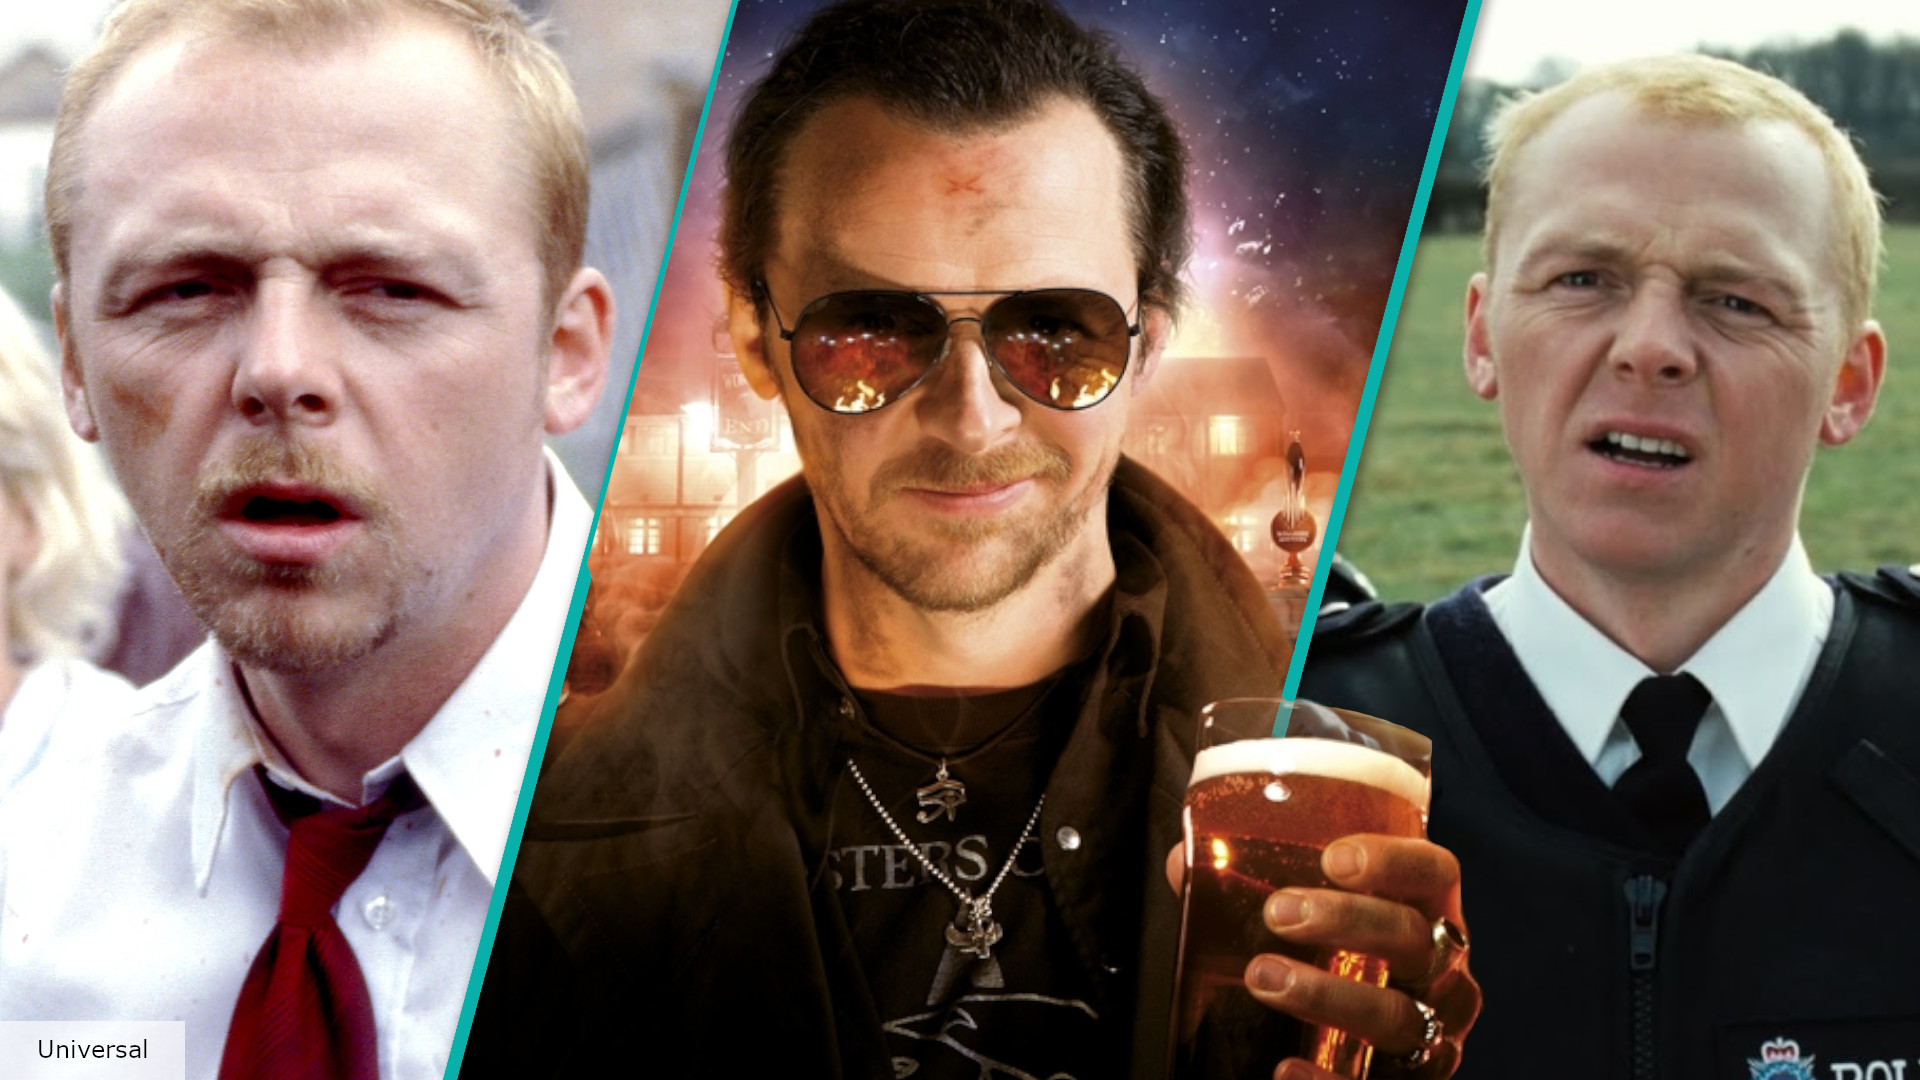 Simon Pegg’s Best Cornetto Trilogy Character Is In The World’s End